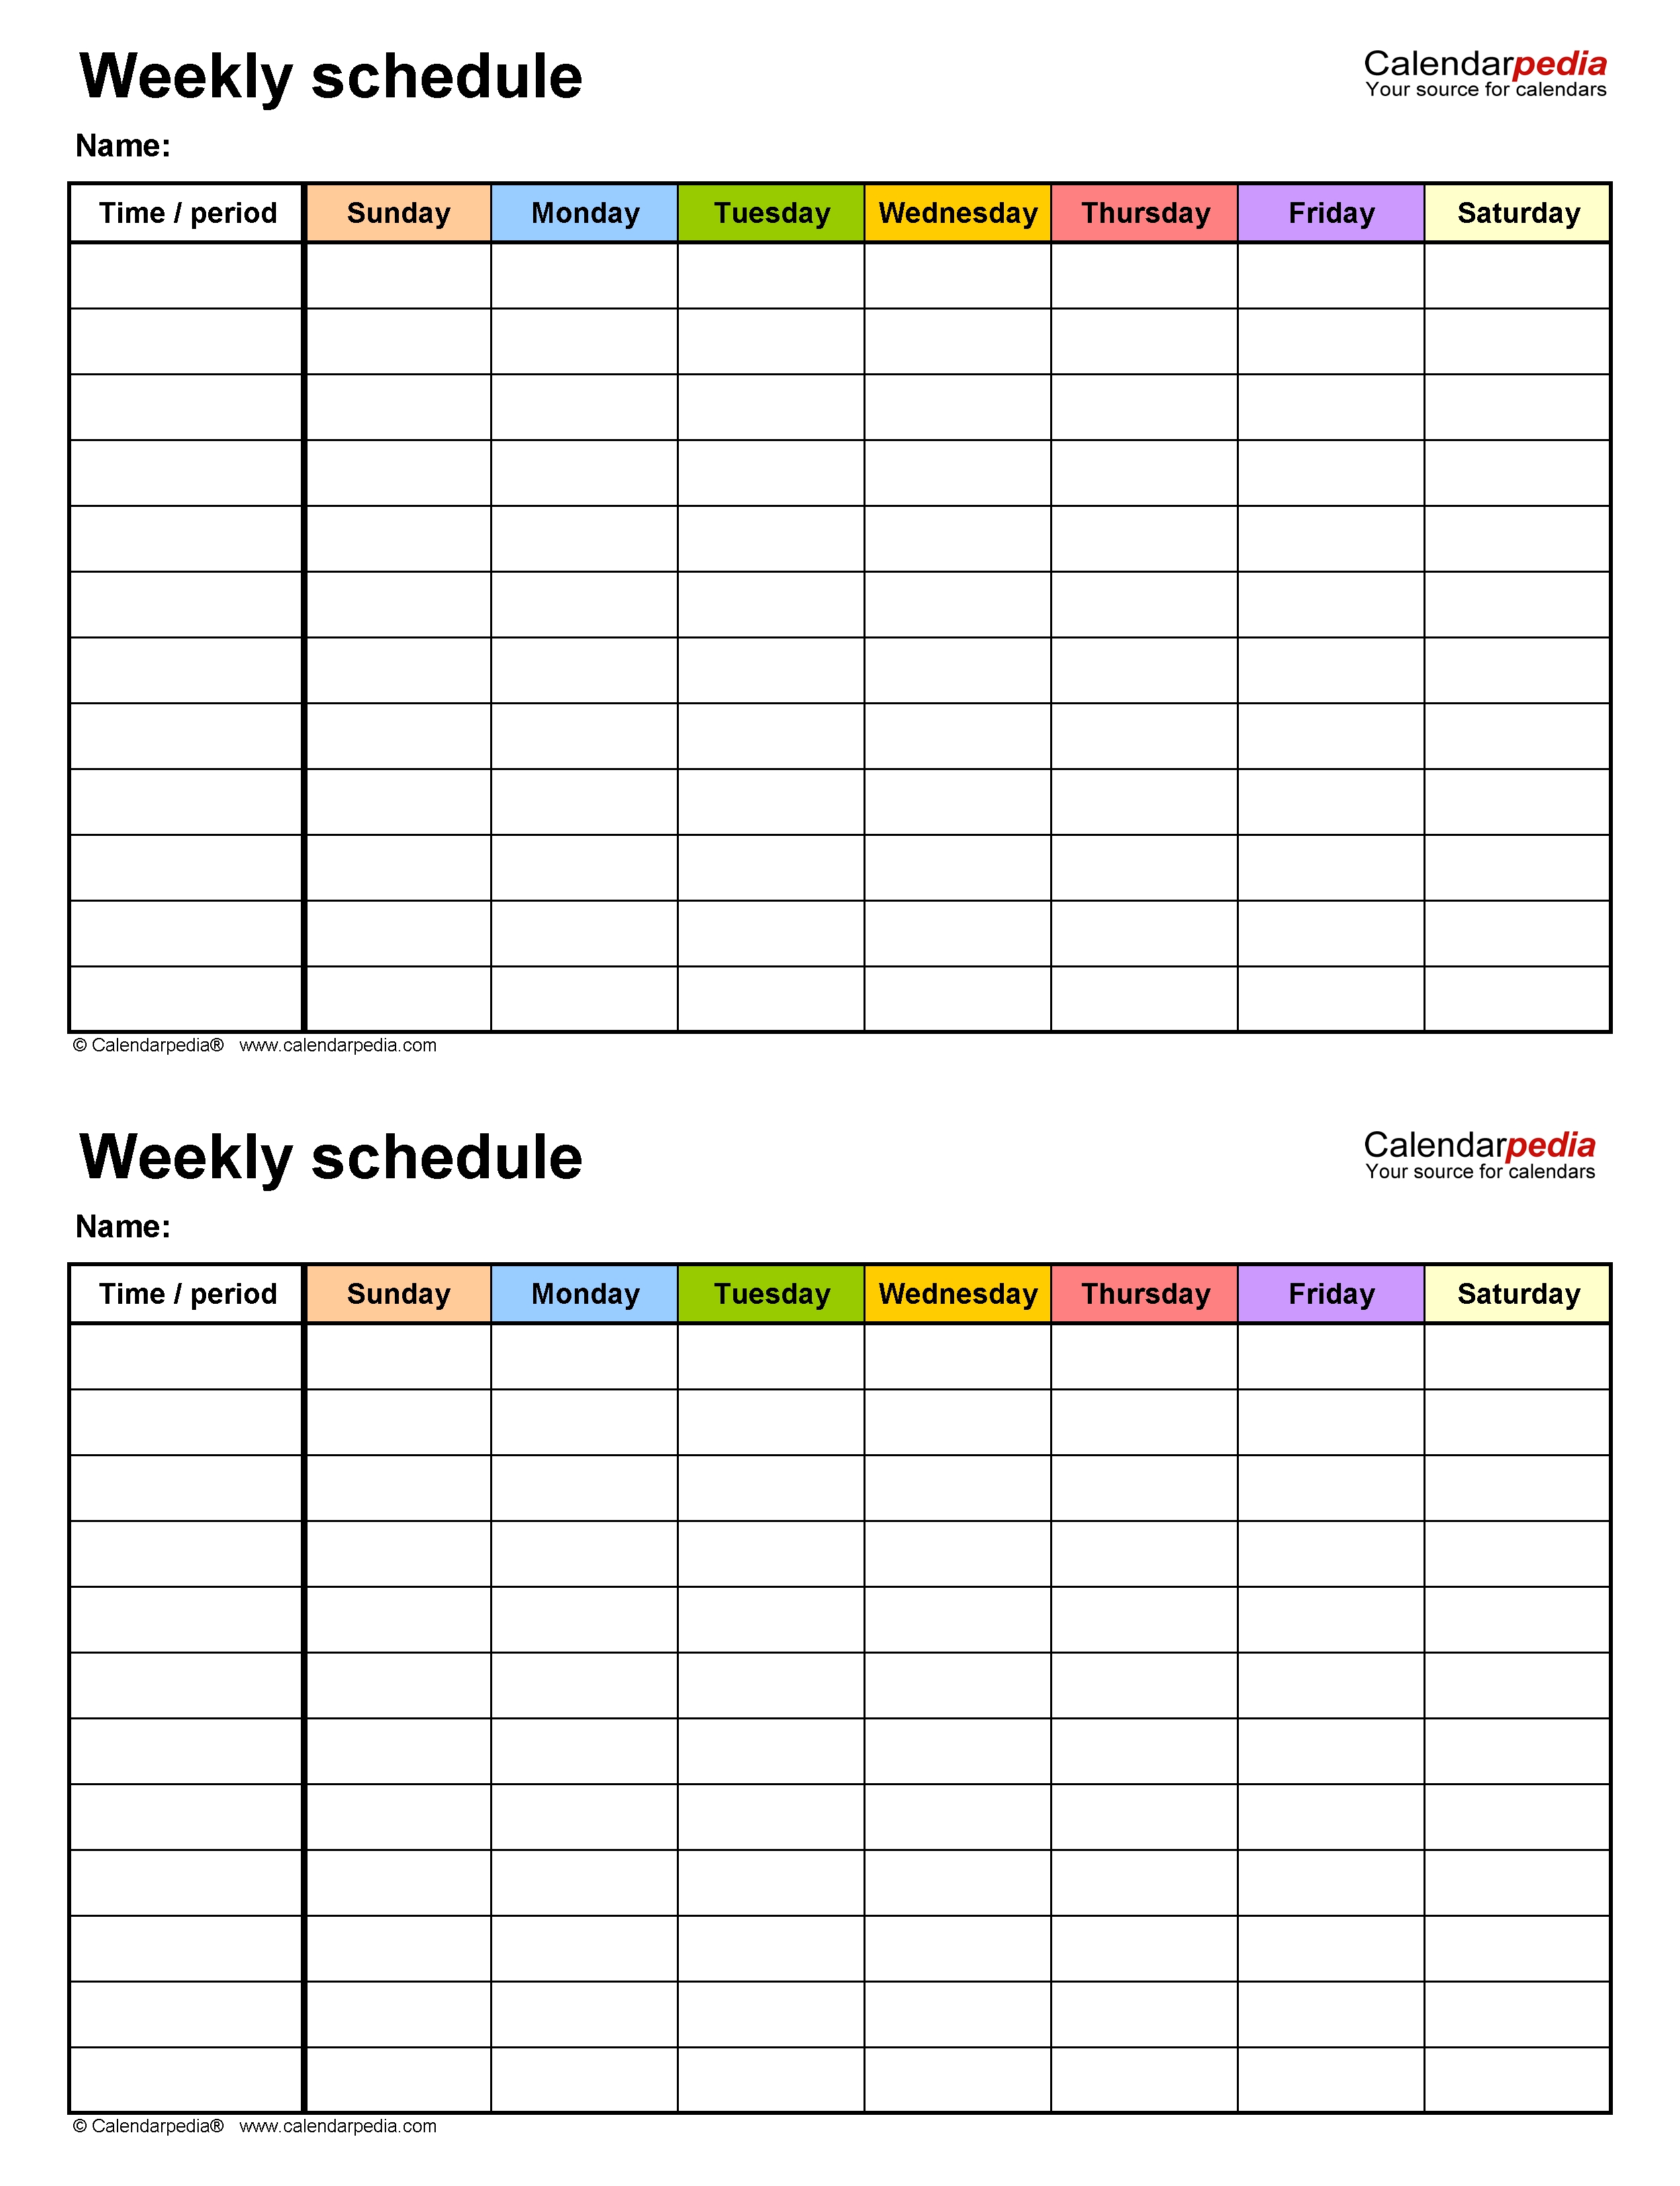 Free Weekly Schedule Templates For Word - 18 Templates 7 Day A Week Calendar Template